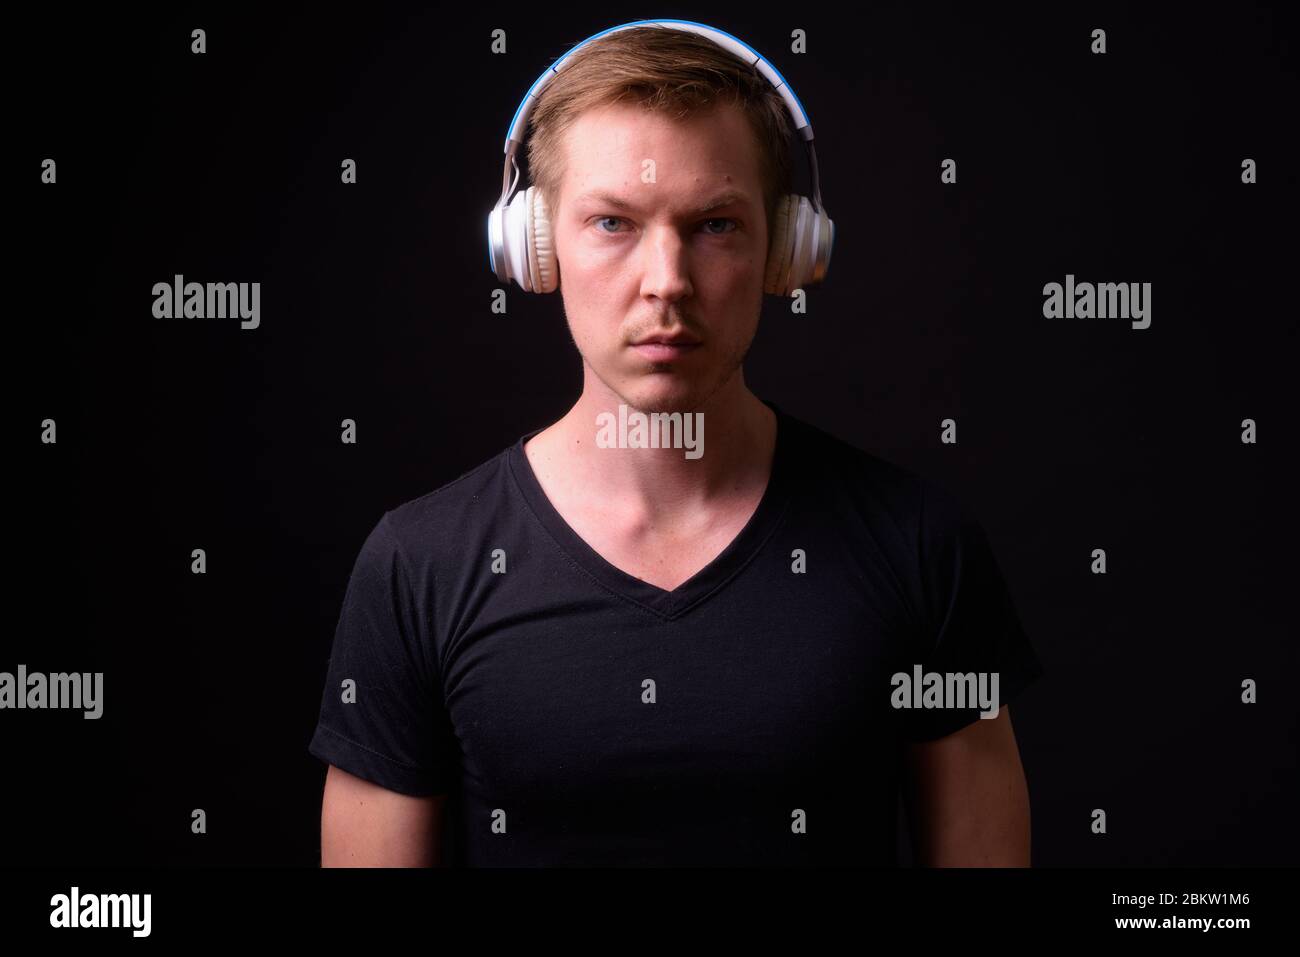 Portrait of young handsome man listening to music Stock Photo